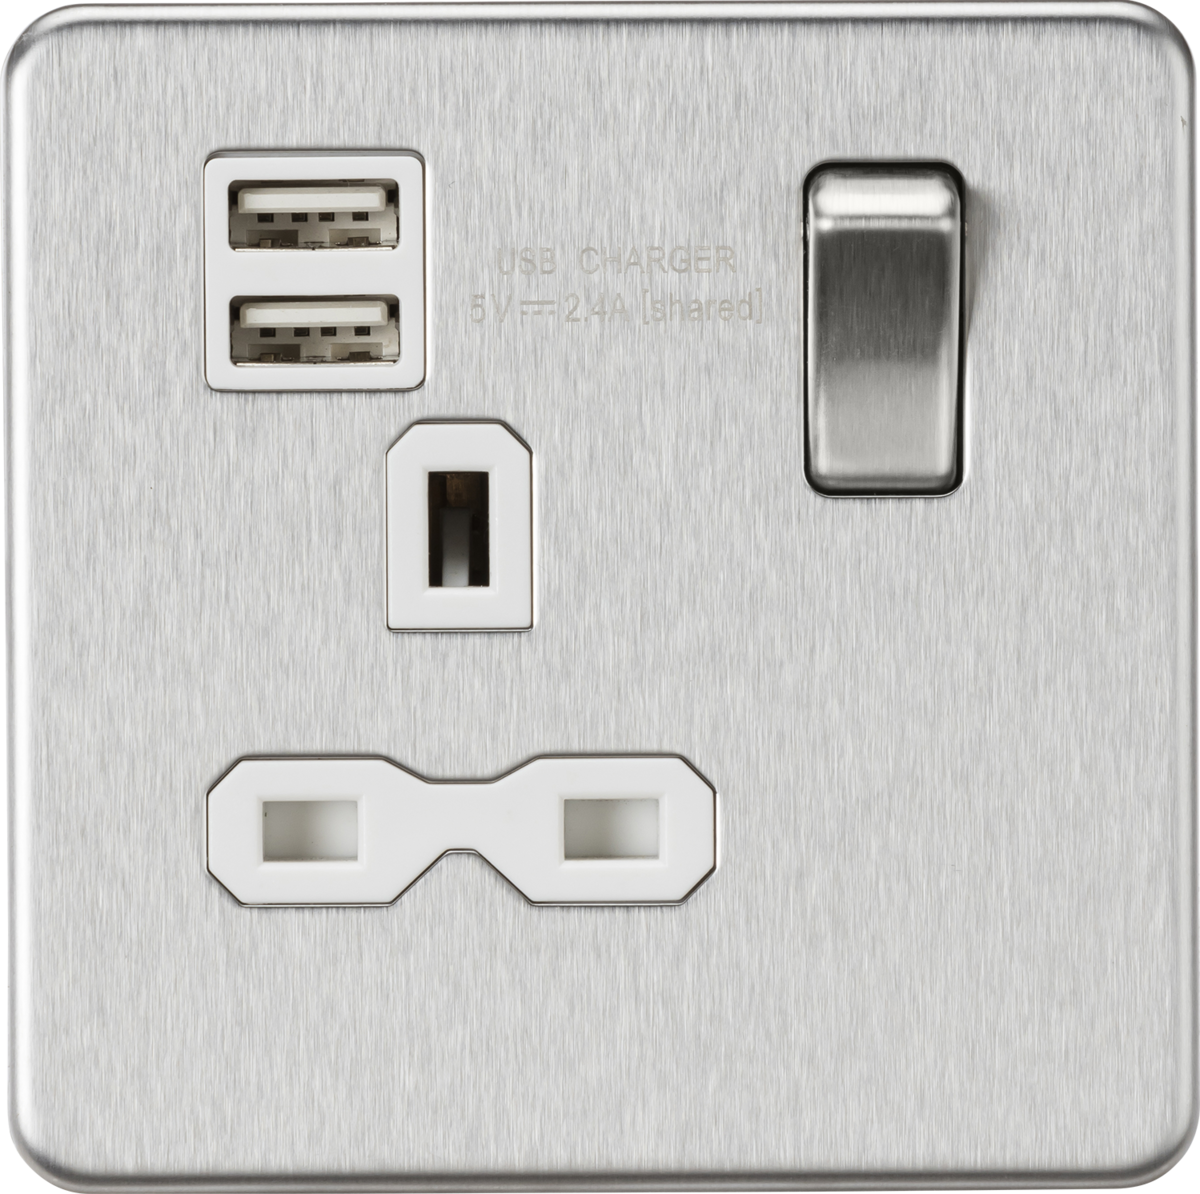 Screwless 13A 1G switched socket with dual USB charger (2.4A) - brushed chrome with white insert